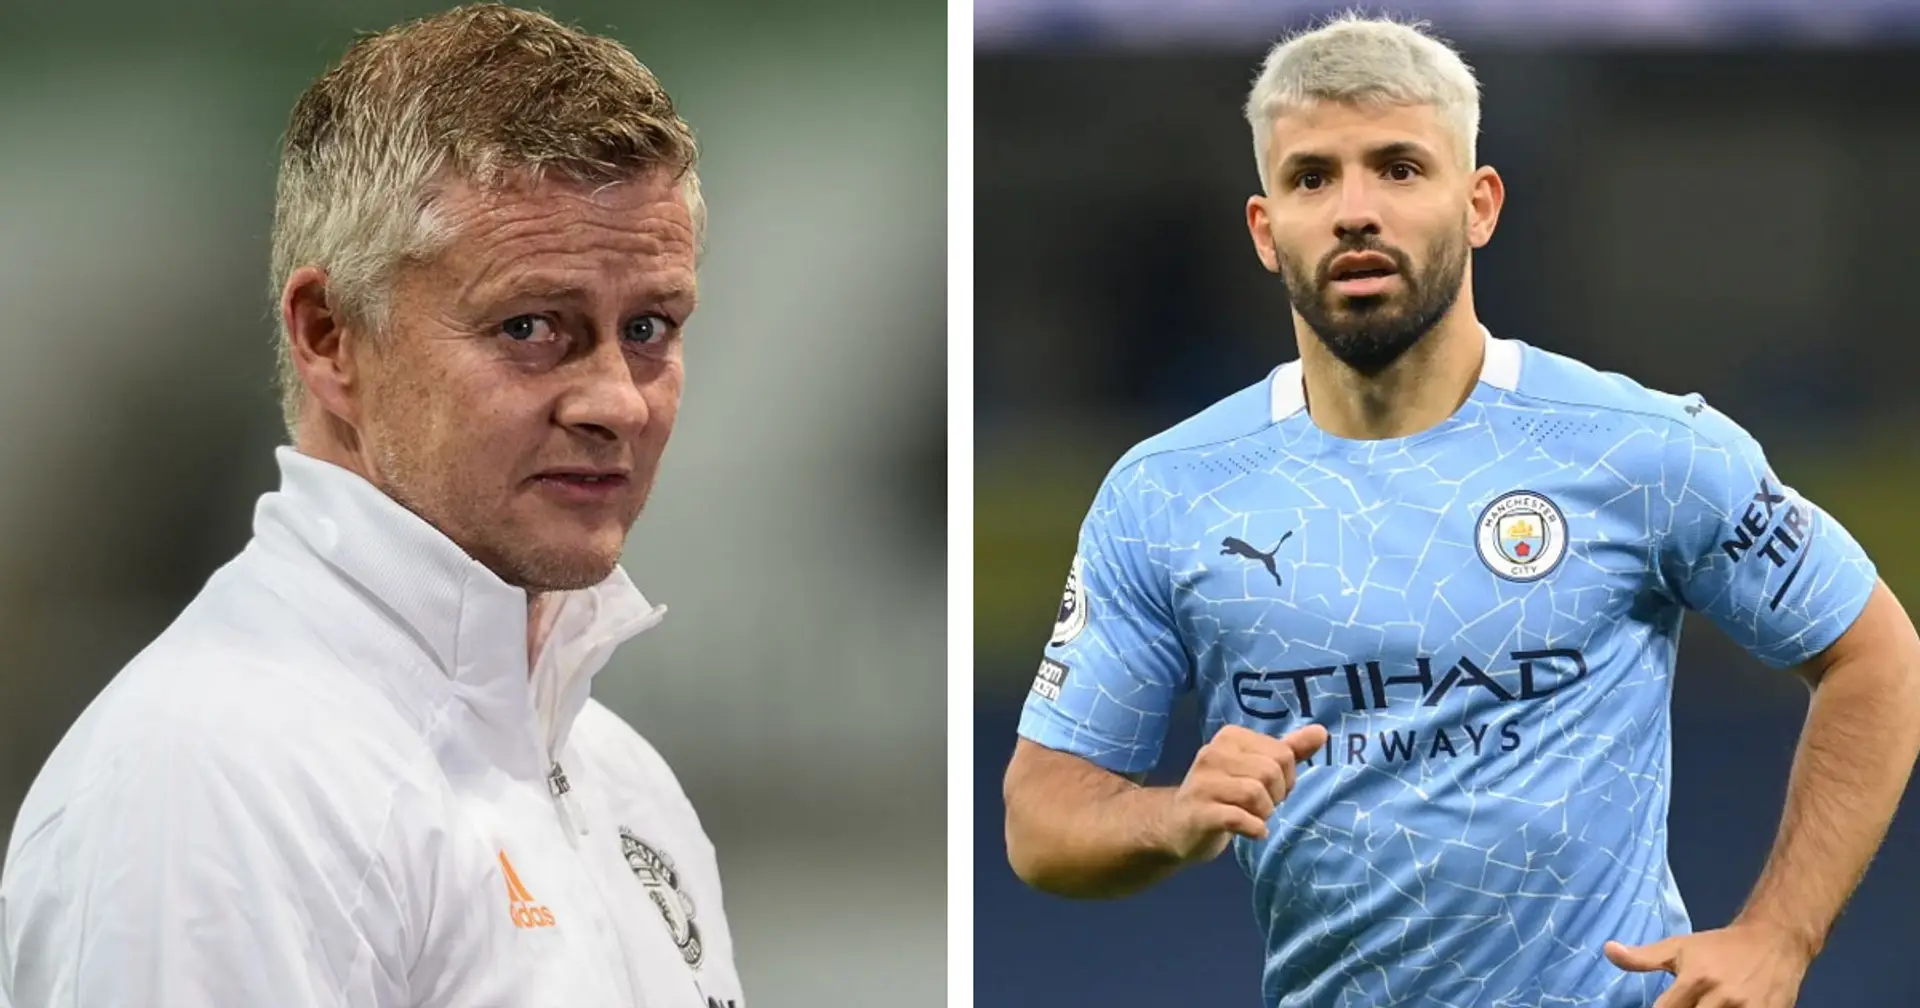 ‘If a rival club tried to sign me and I had gone, where’s my loyalty?’: Solskjaer explains why he won’t sign Aguero